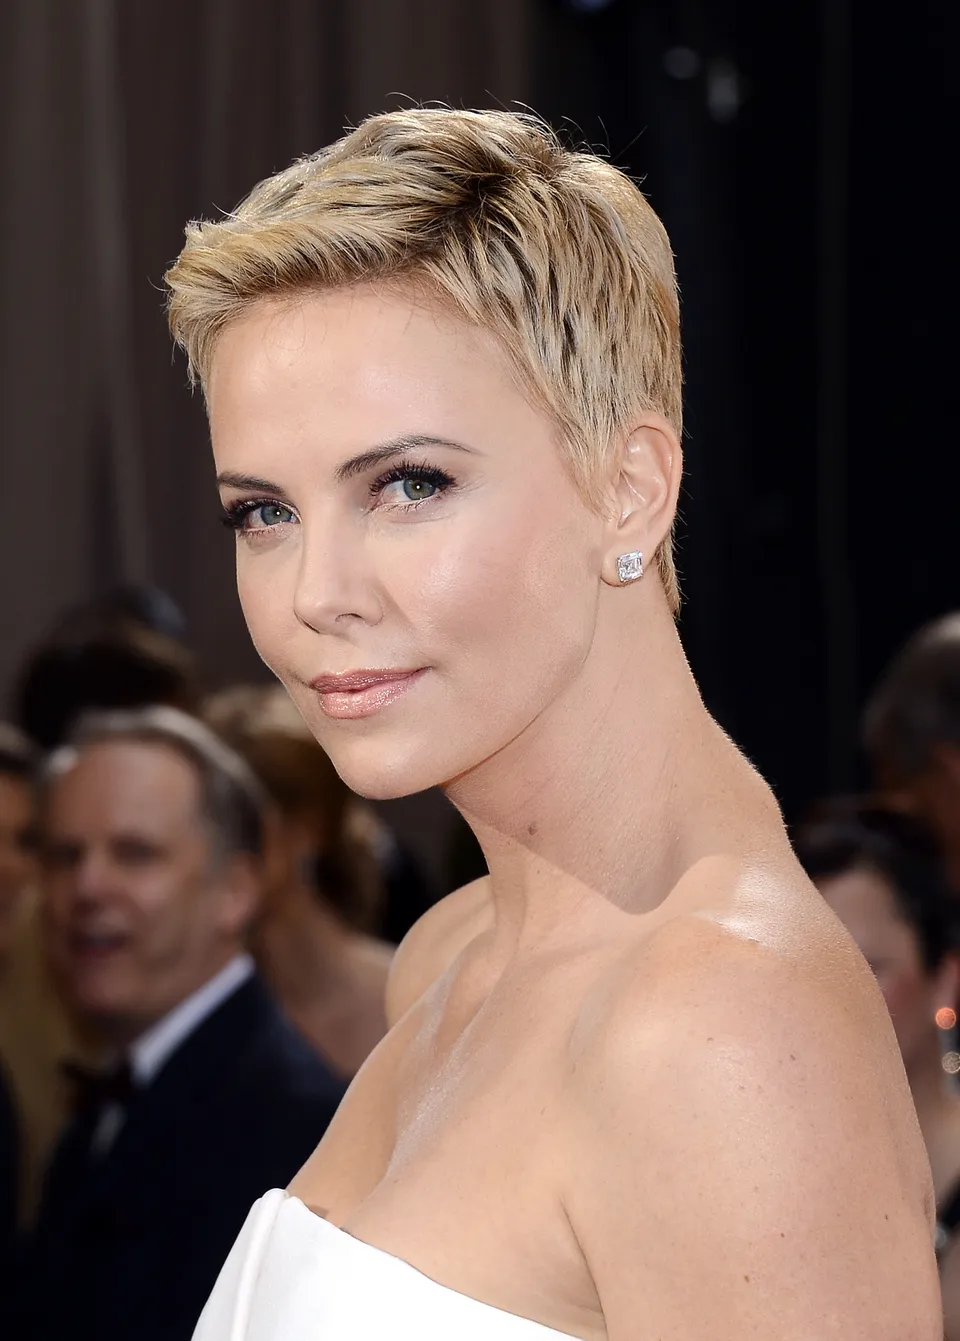 50 Of The Best Celebrity Short Haircuts For When You Need Some Pixie Inspiration Huffpost Life